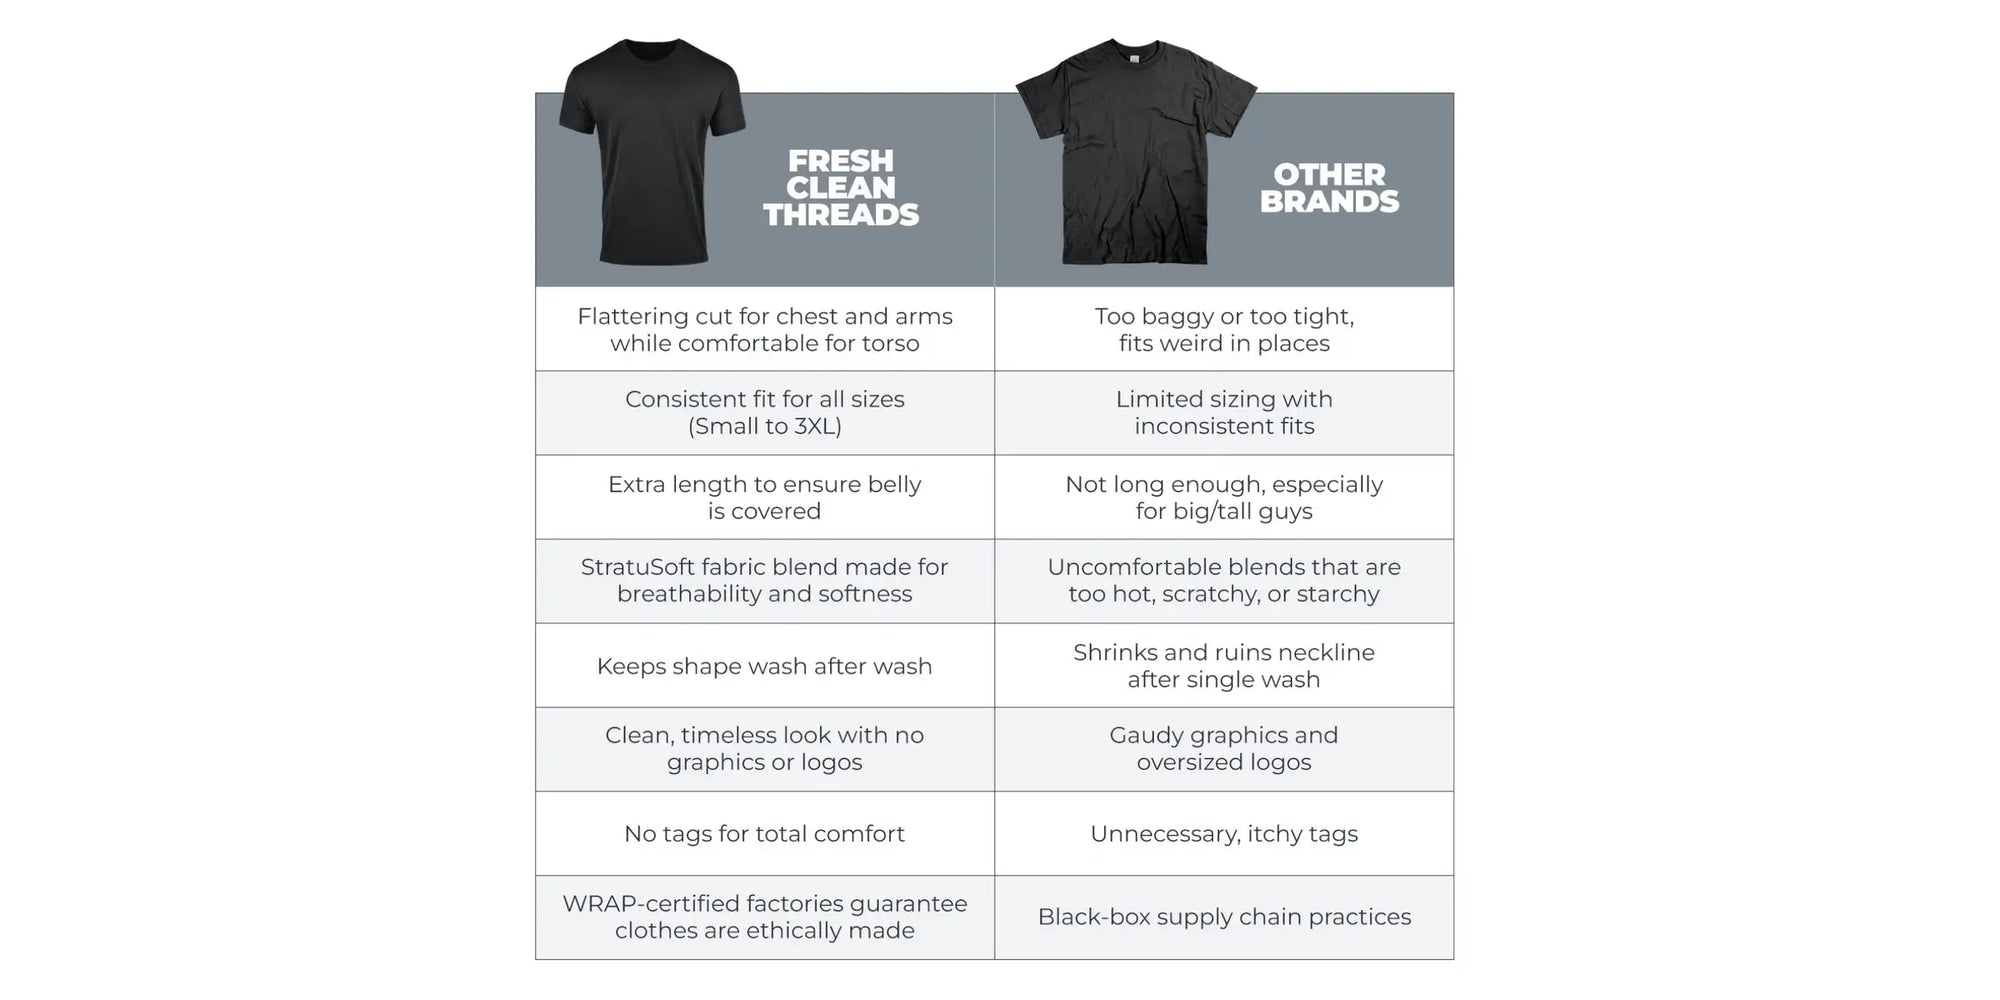 Compare Fresh Clean Threads versus Other T-shirt Brands